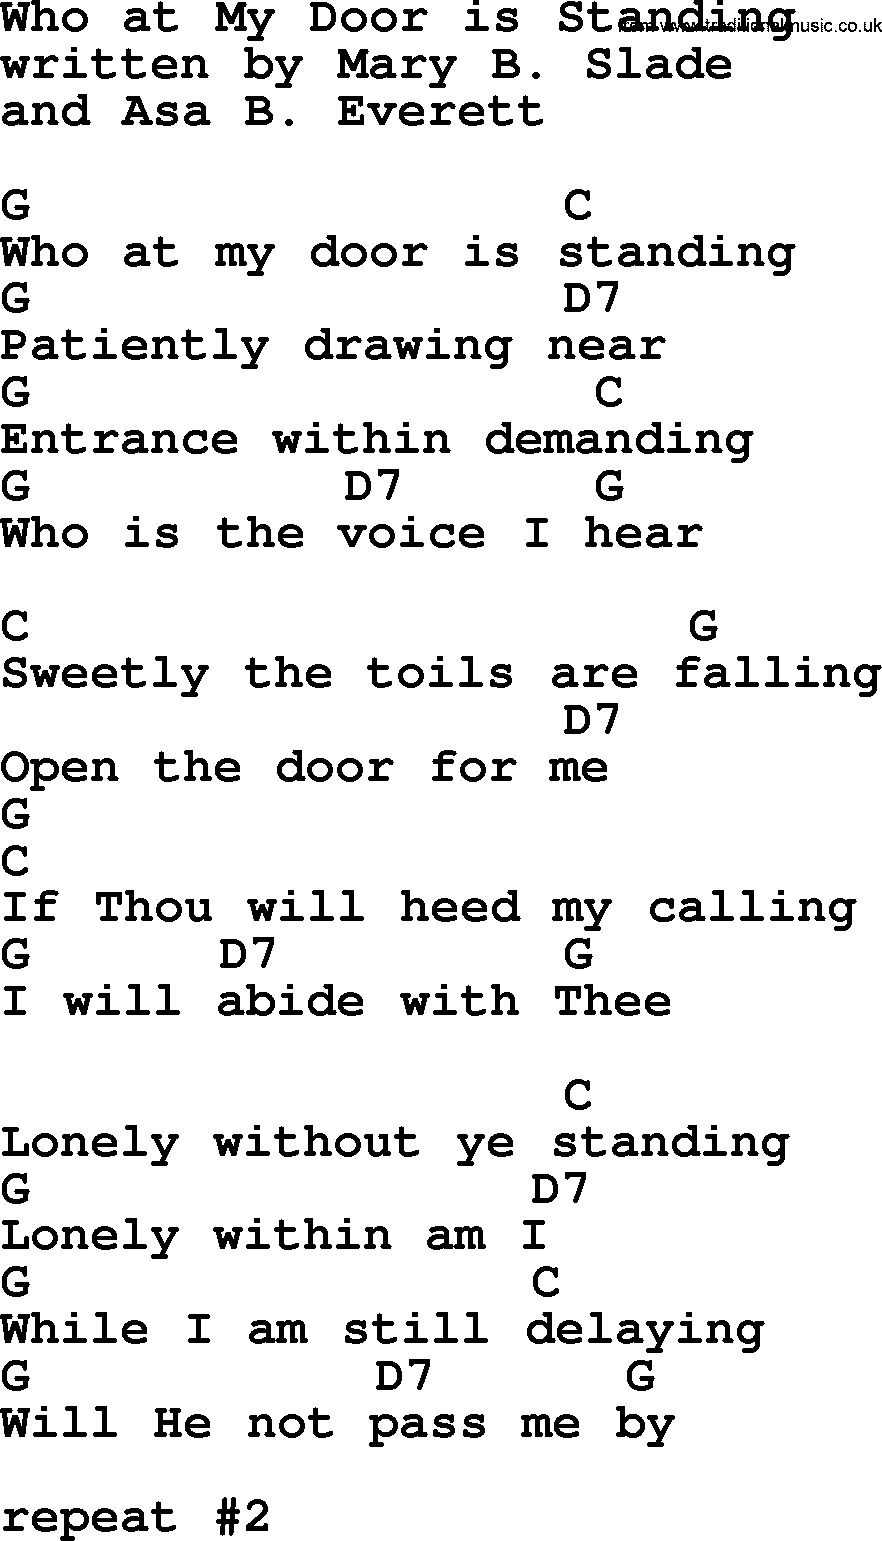 Marty Robbins song: Who at My Door is Standing, lyrics and chords